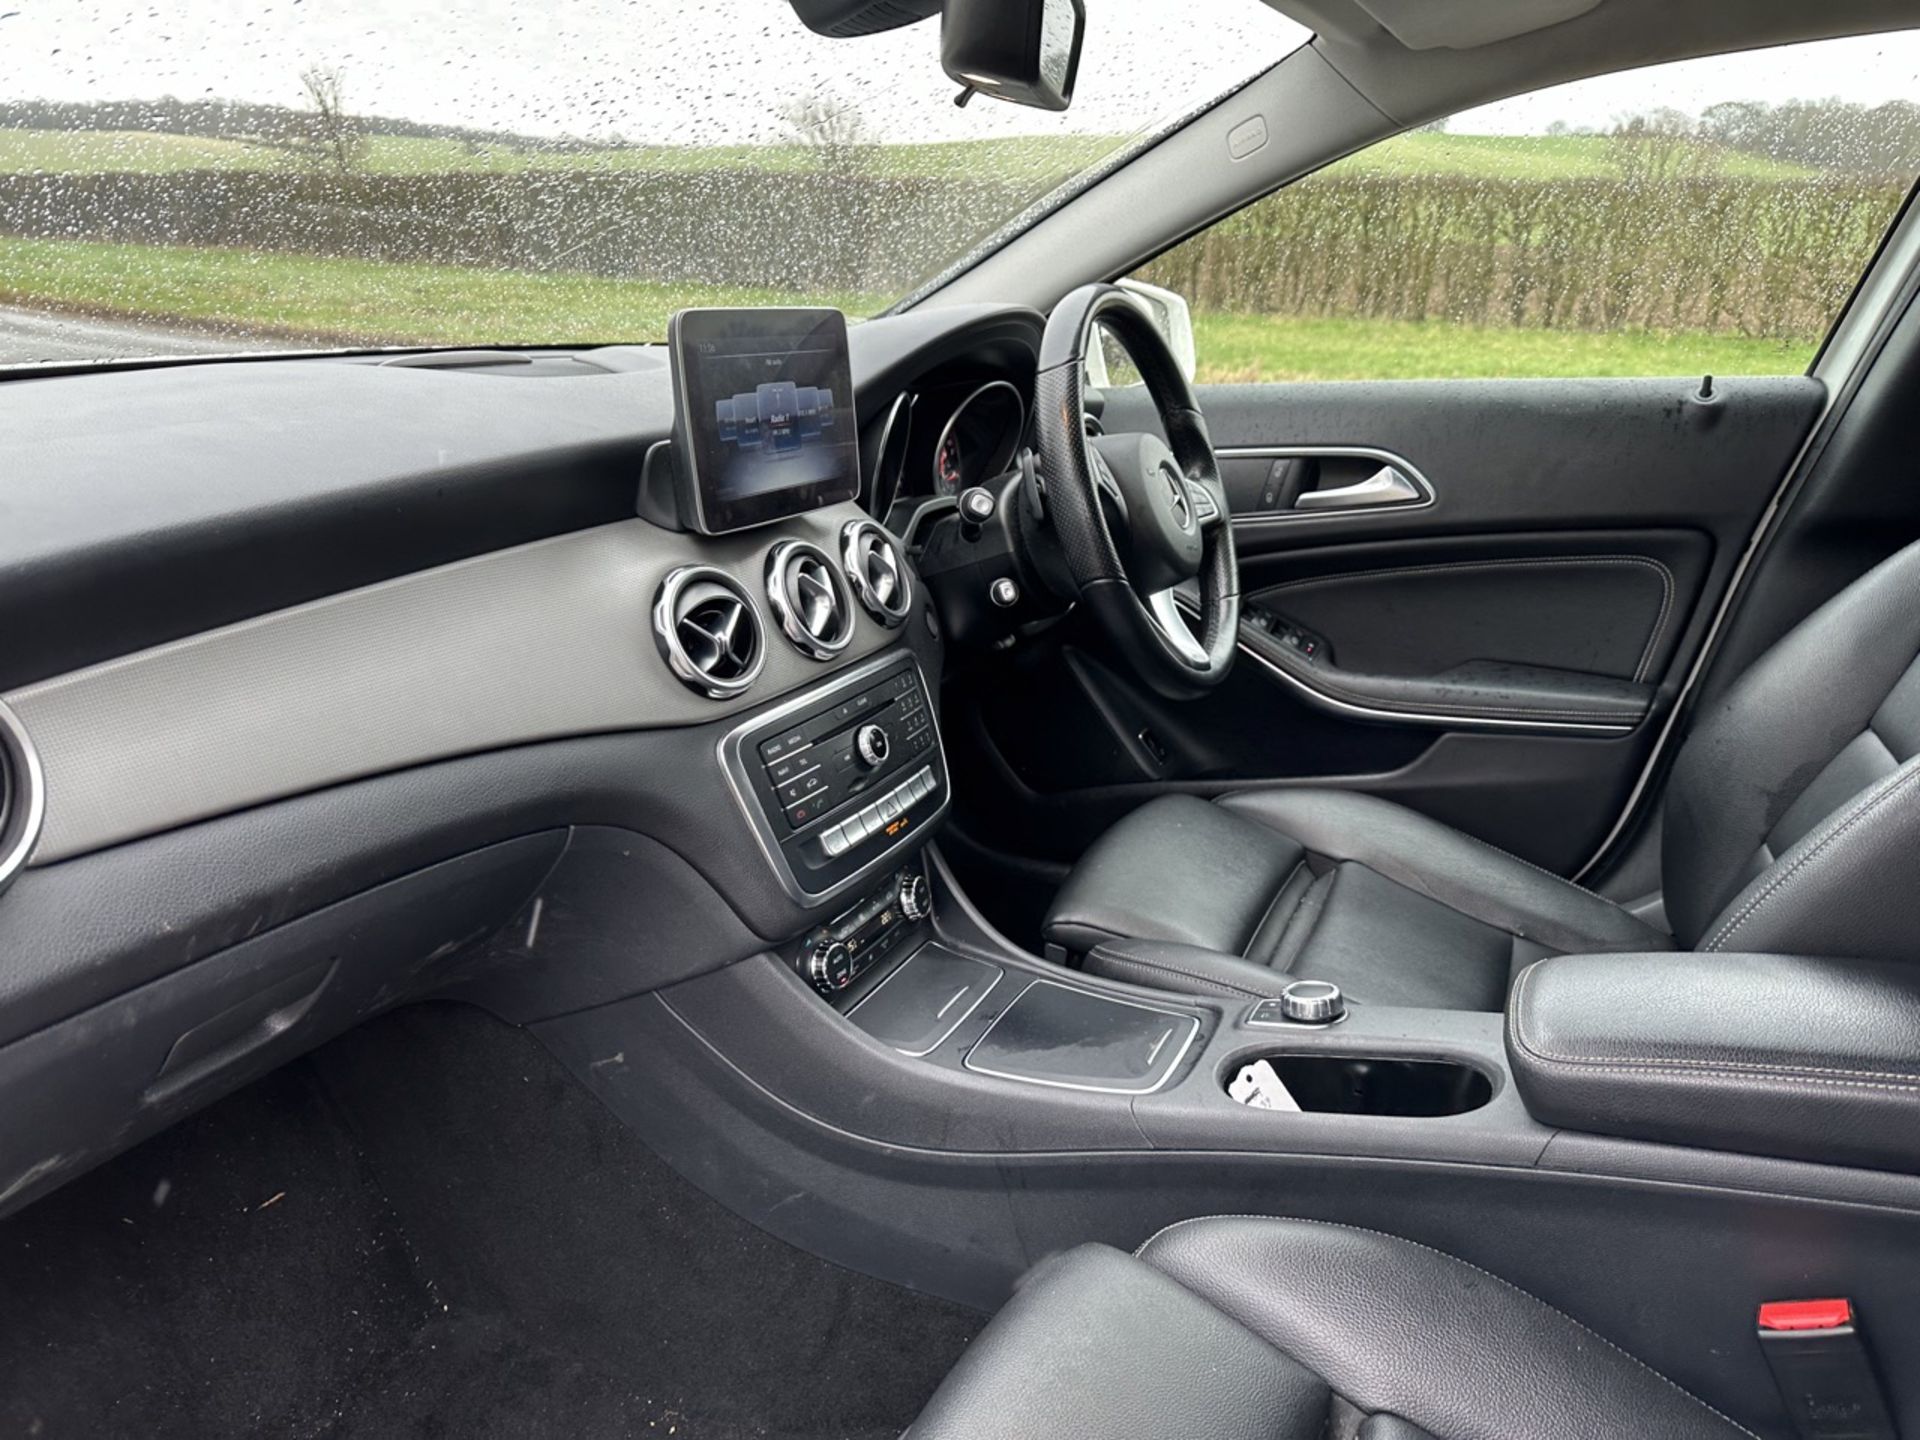 MERCEDES GLA 200d AUTO "SPORT EXECUTIVE" 2019 MODEL - LEATHER - LOW MILES - AIR CON - Image 15 of 17